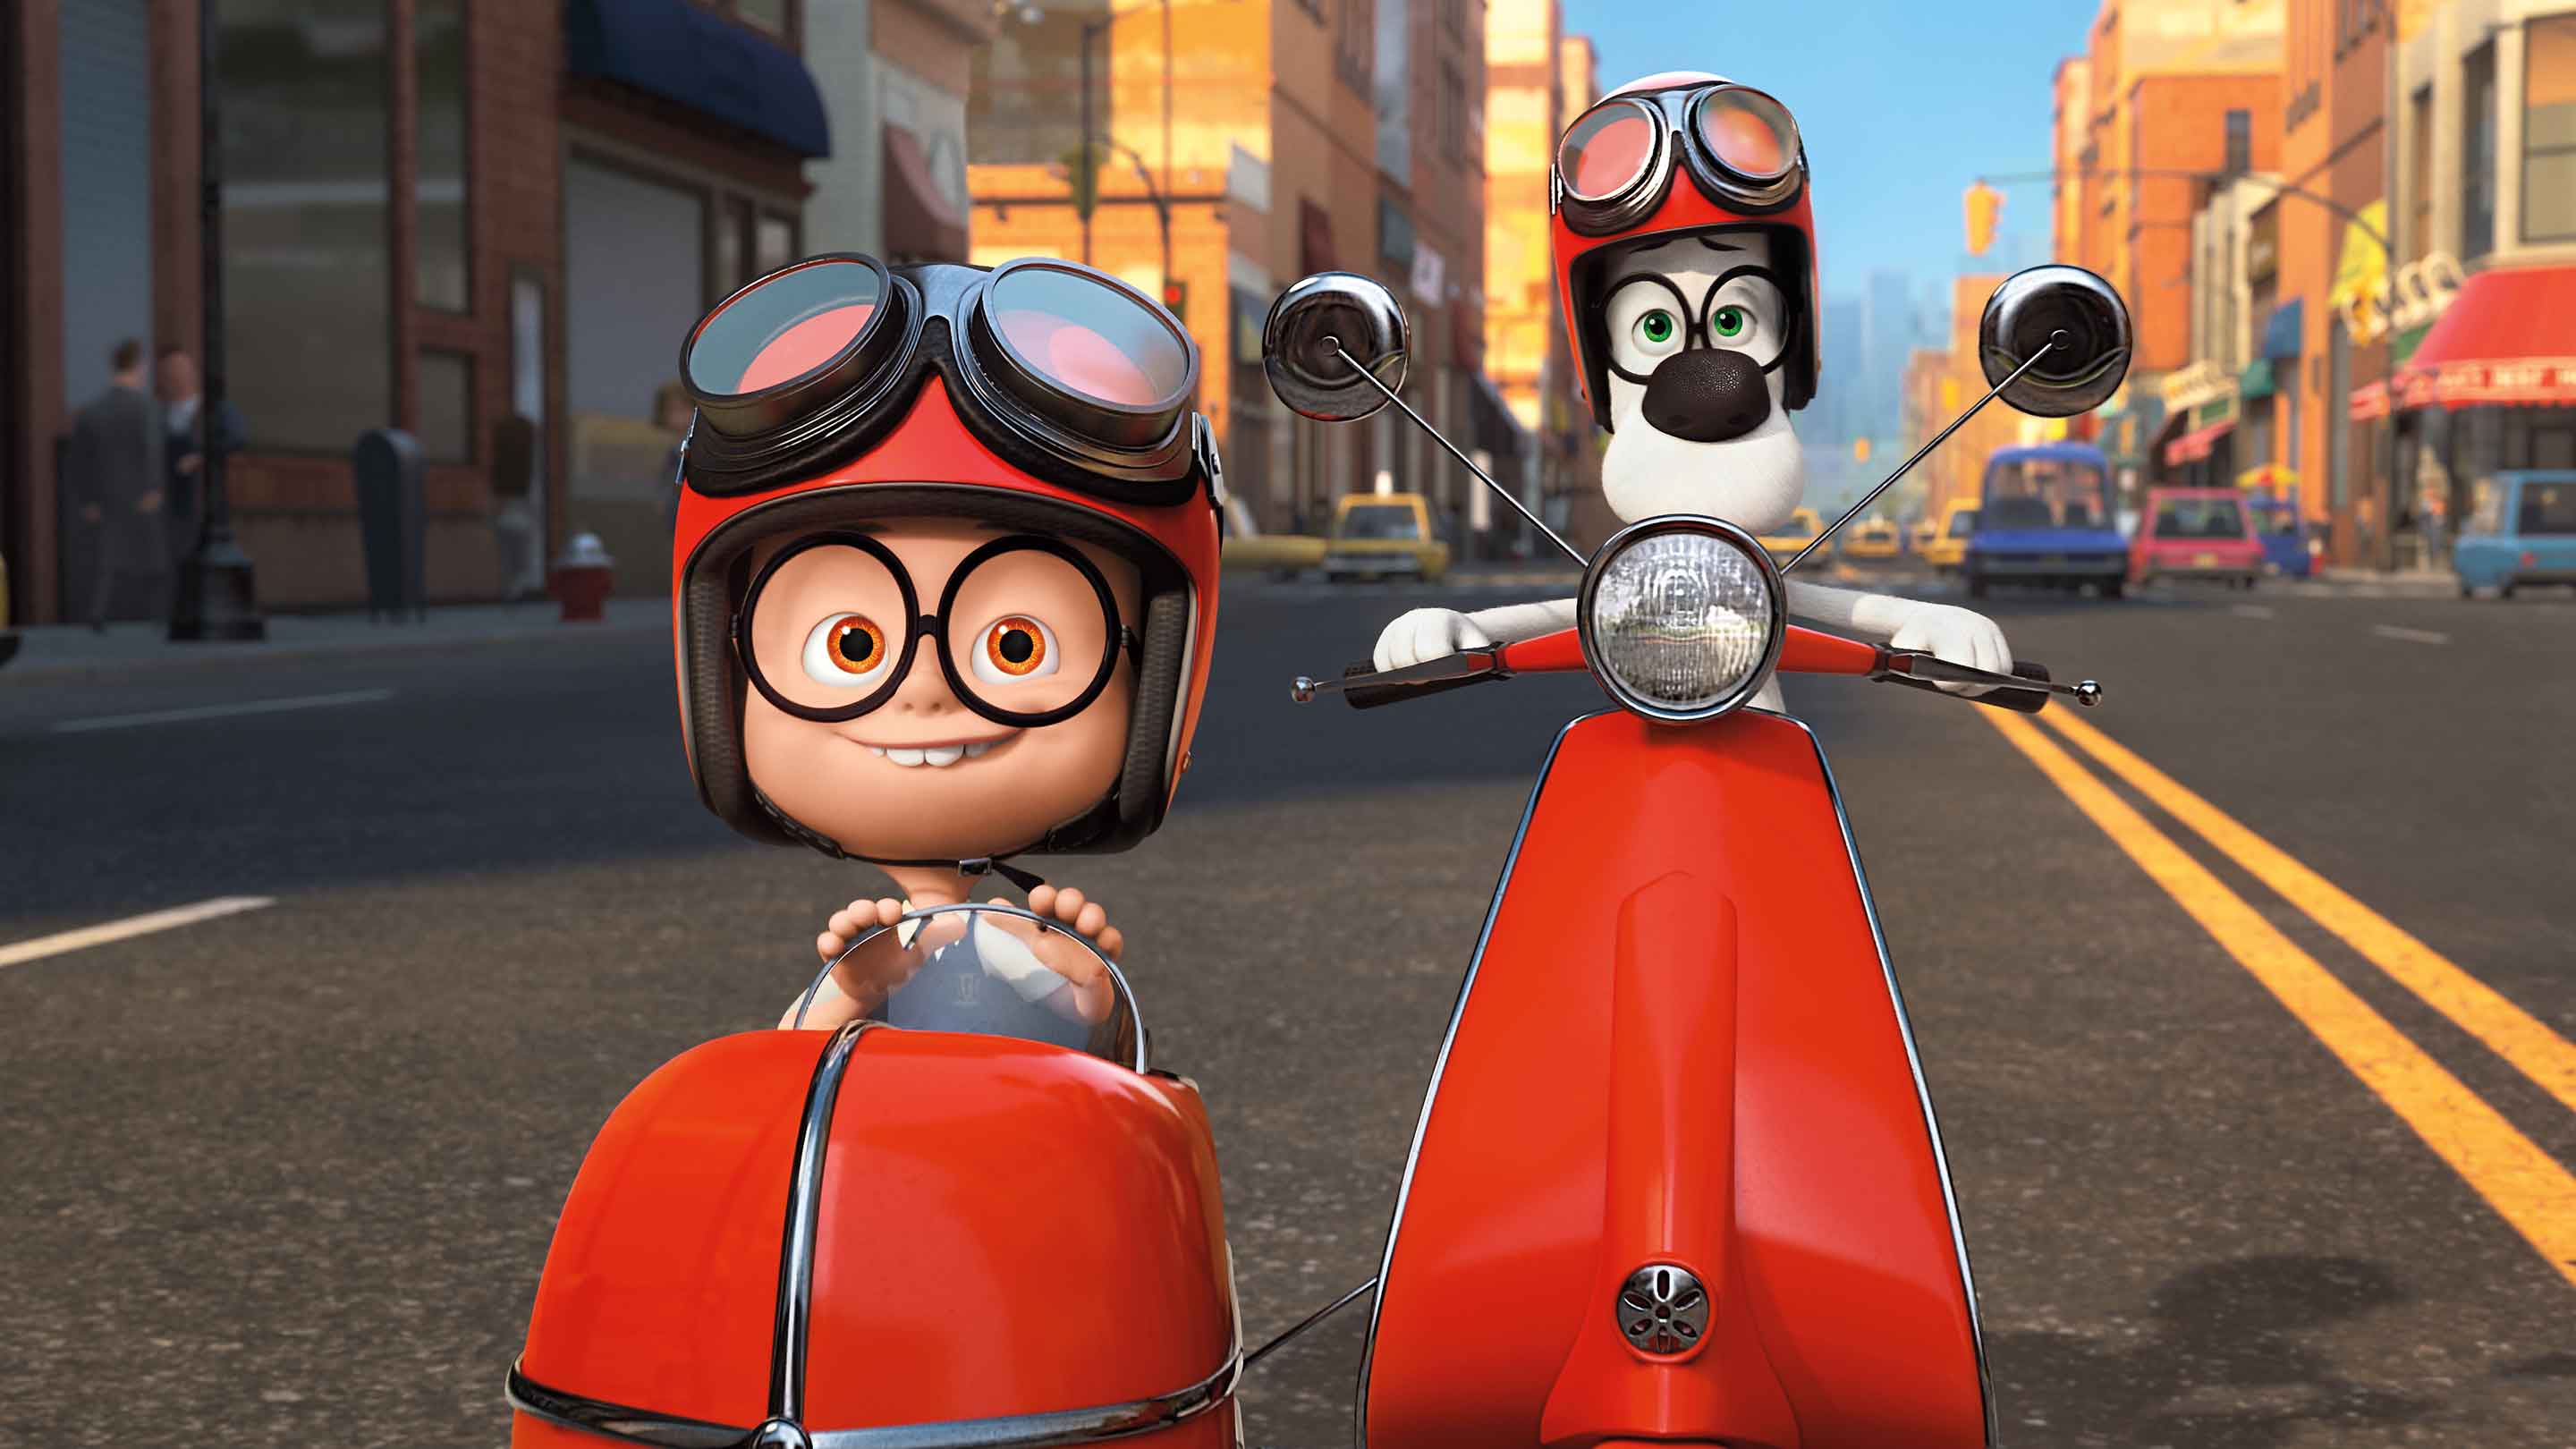 mr. peabody and sherman in a motorcycle with side car in mr. peabody and sherman, one of the Best family movies on Netflix